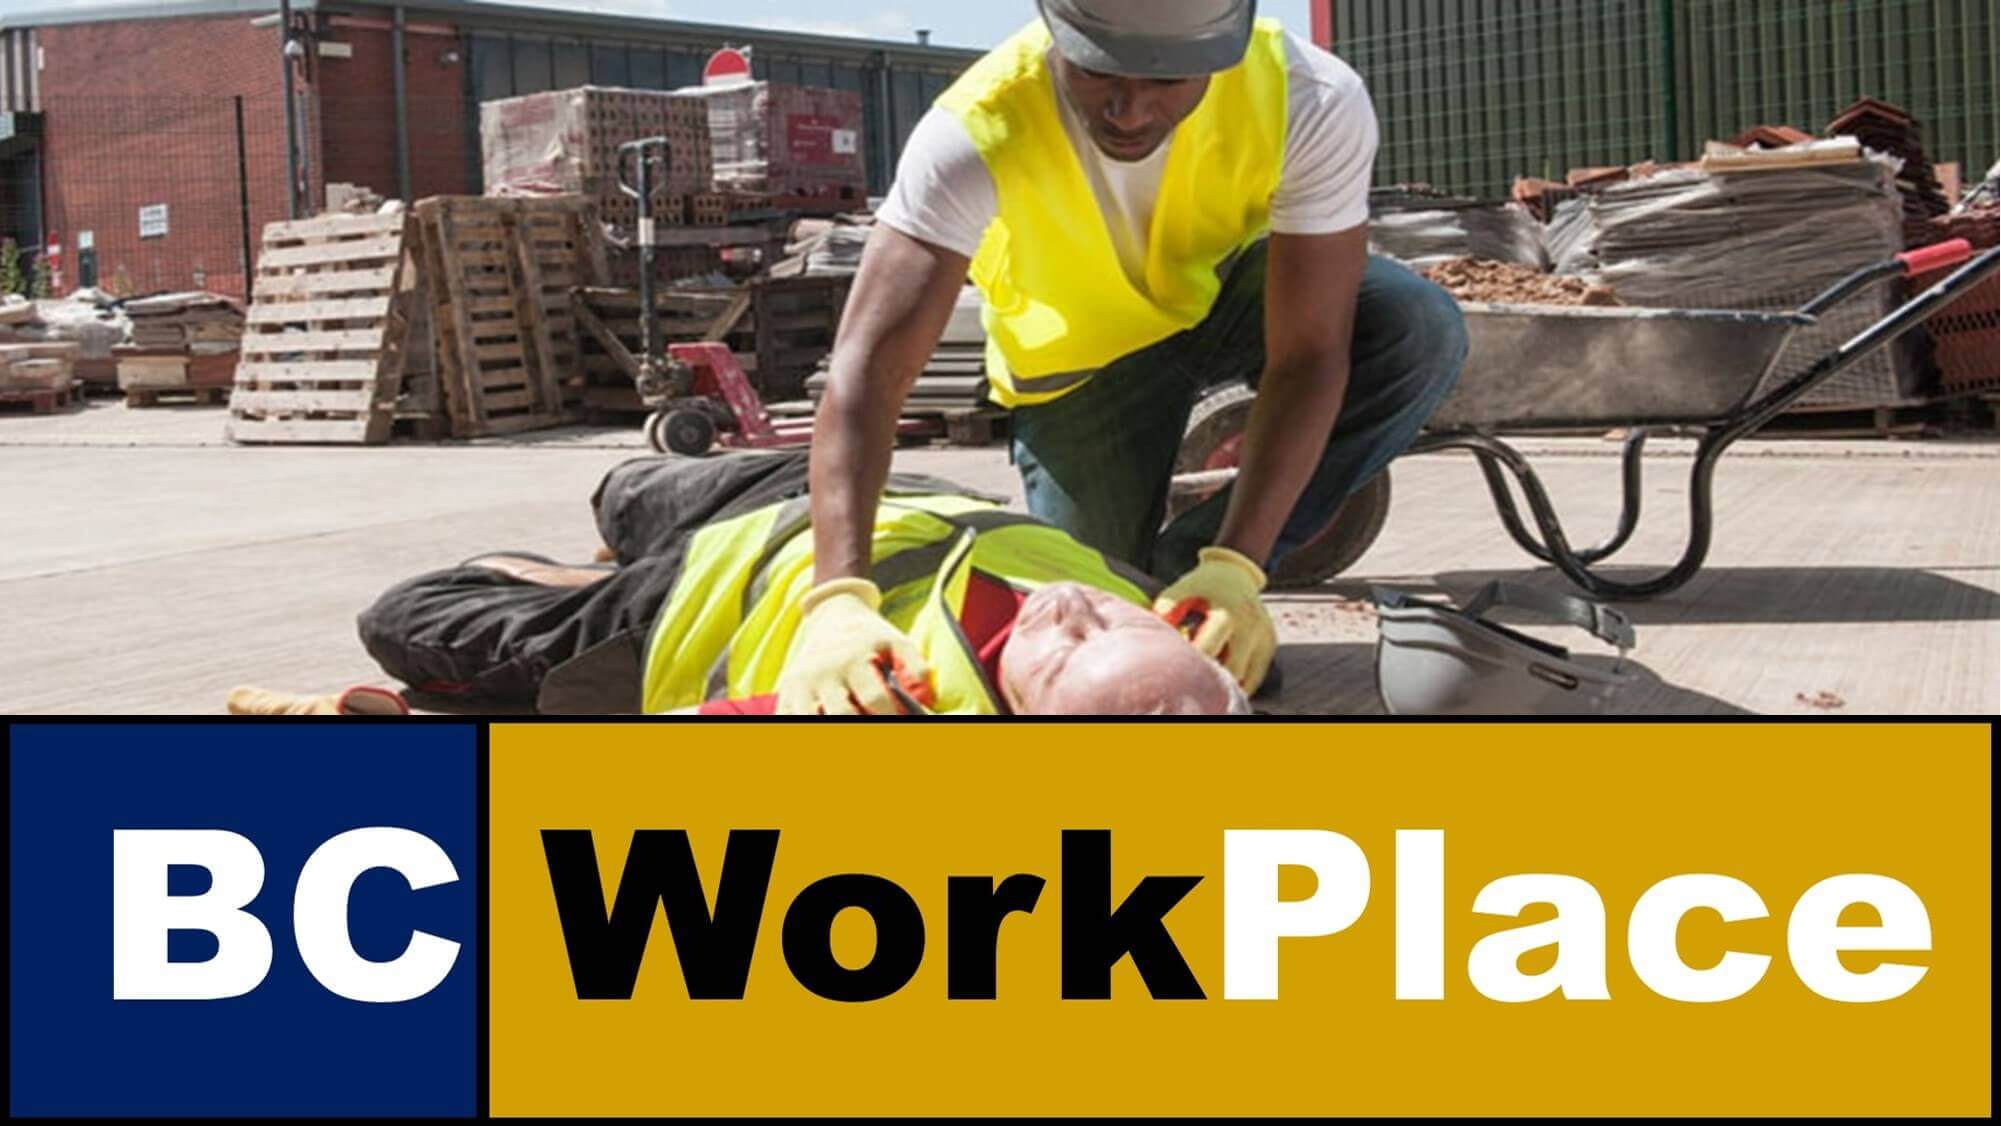 Worksite First Aid